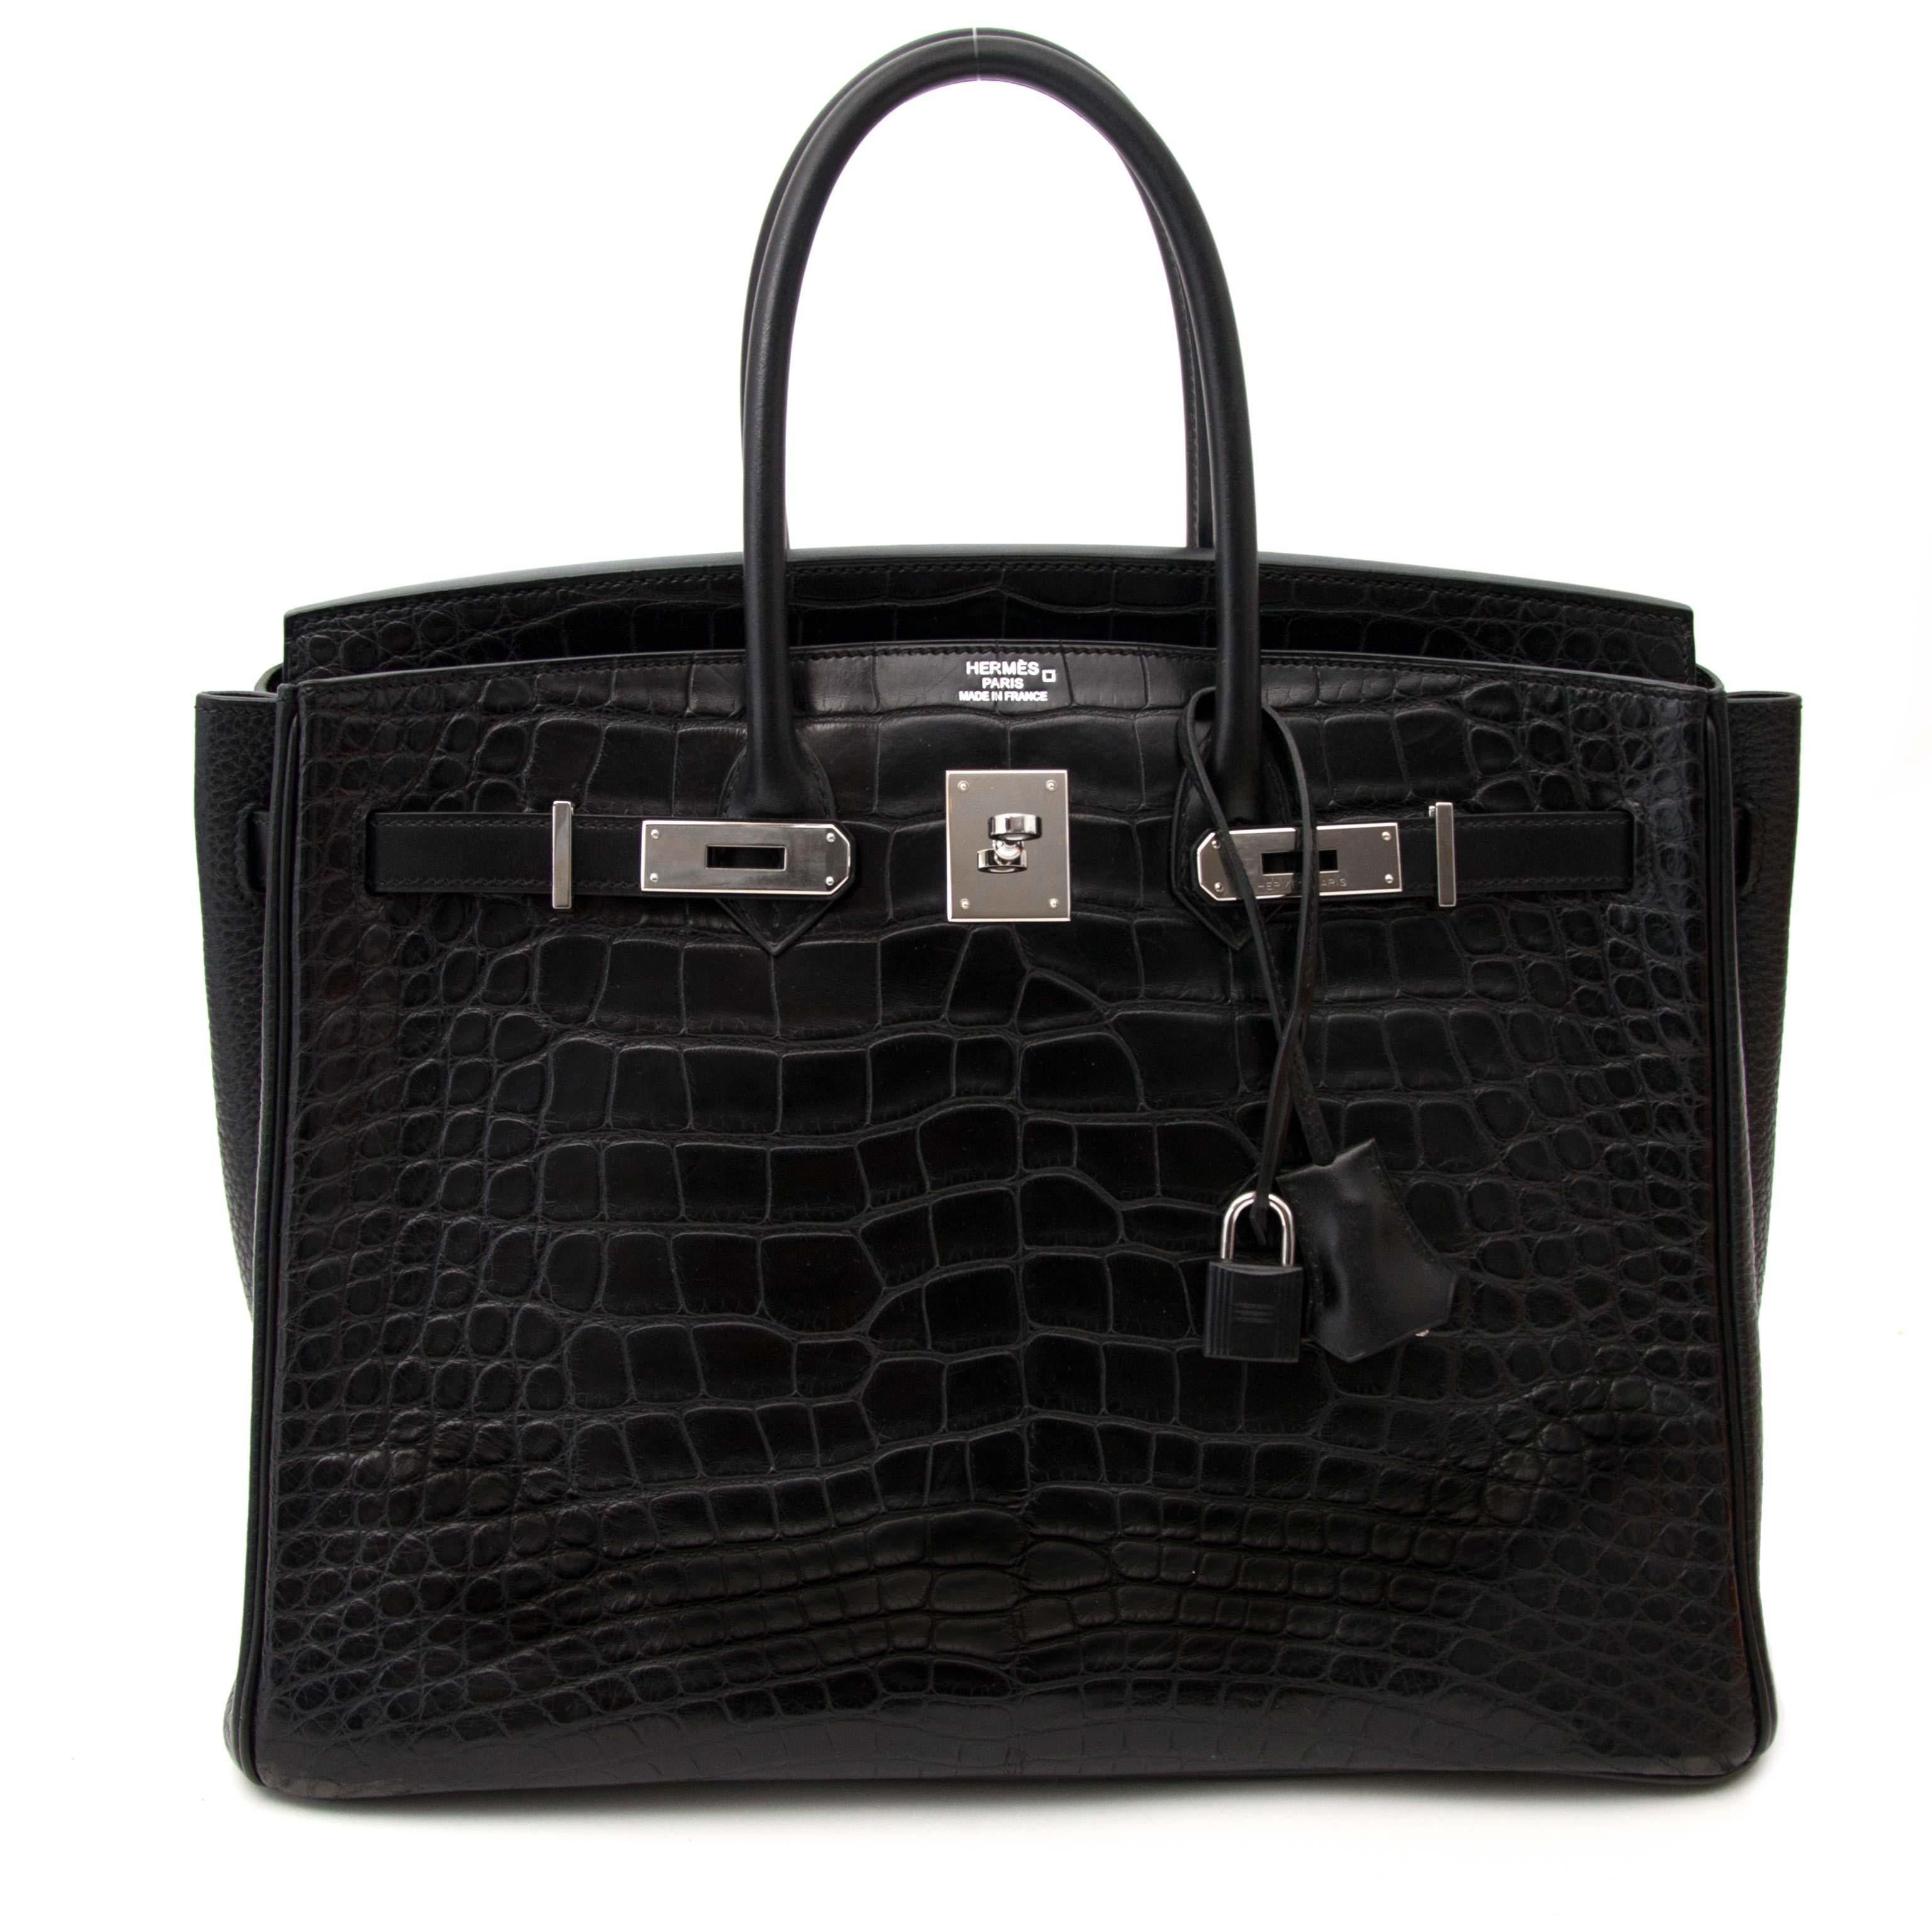 Super Rare Hermes Black Birkin 35 Three Skin (Alligator, Clemence Taurillon, Box Calf)

Breathtaking this Highly Collectible Hermès Black Birkin Bag .
All Birkins and Kellys are very hard to secure, but this distinctive version is incredibly rare as